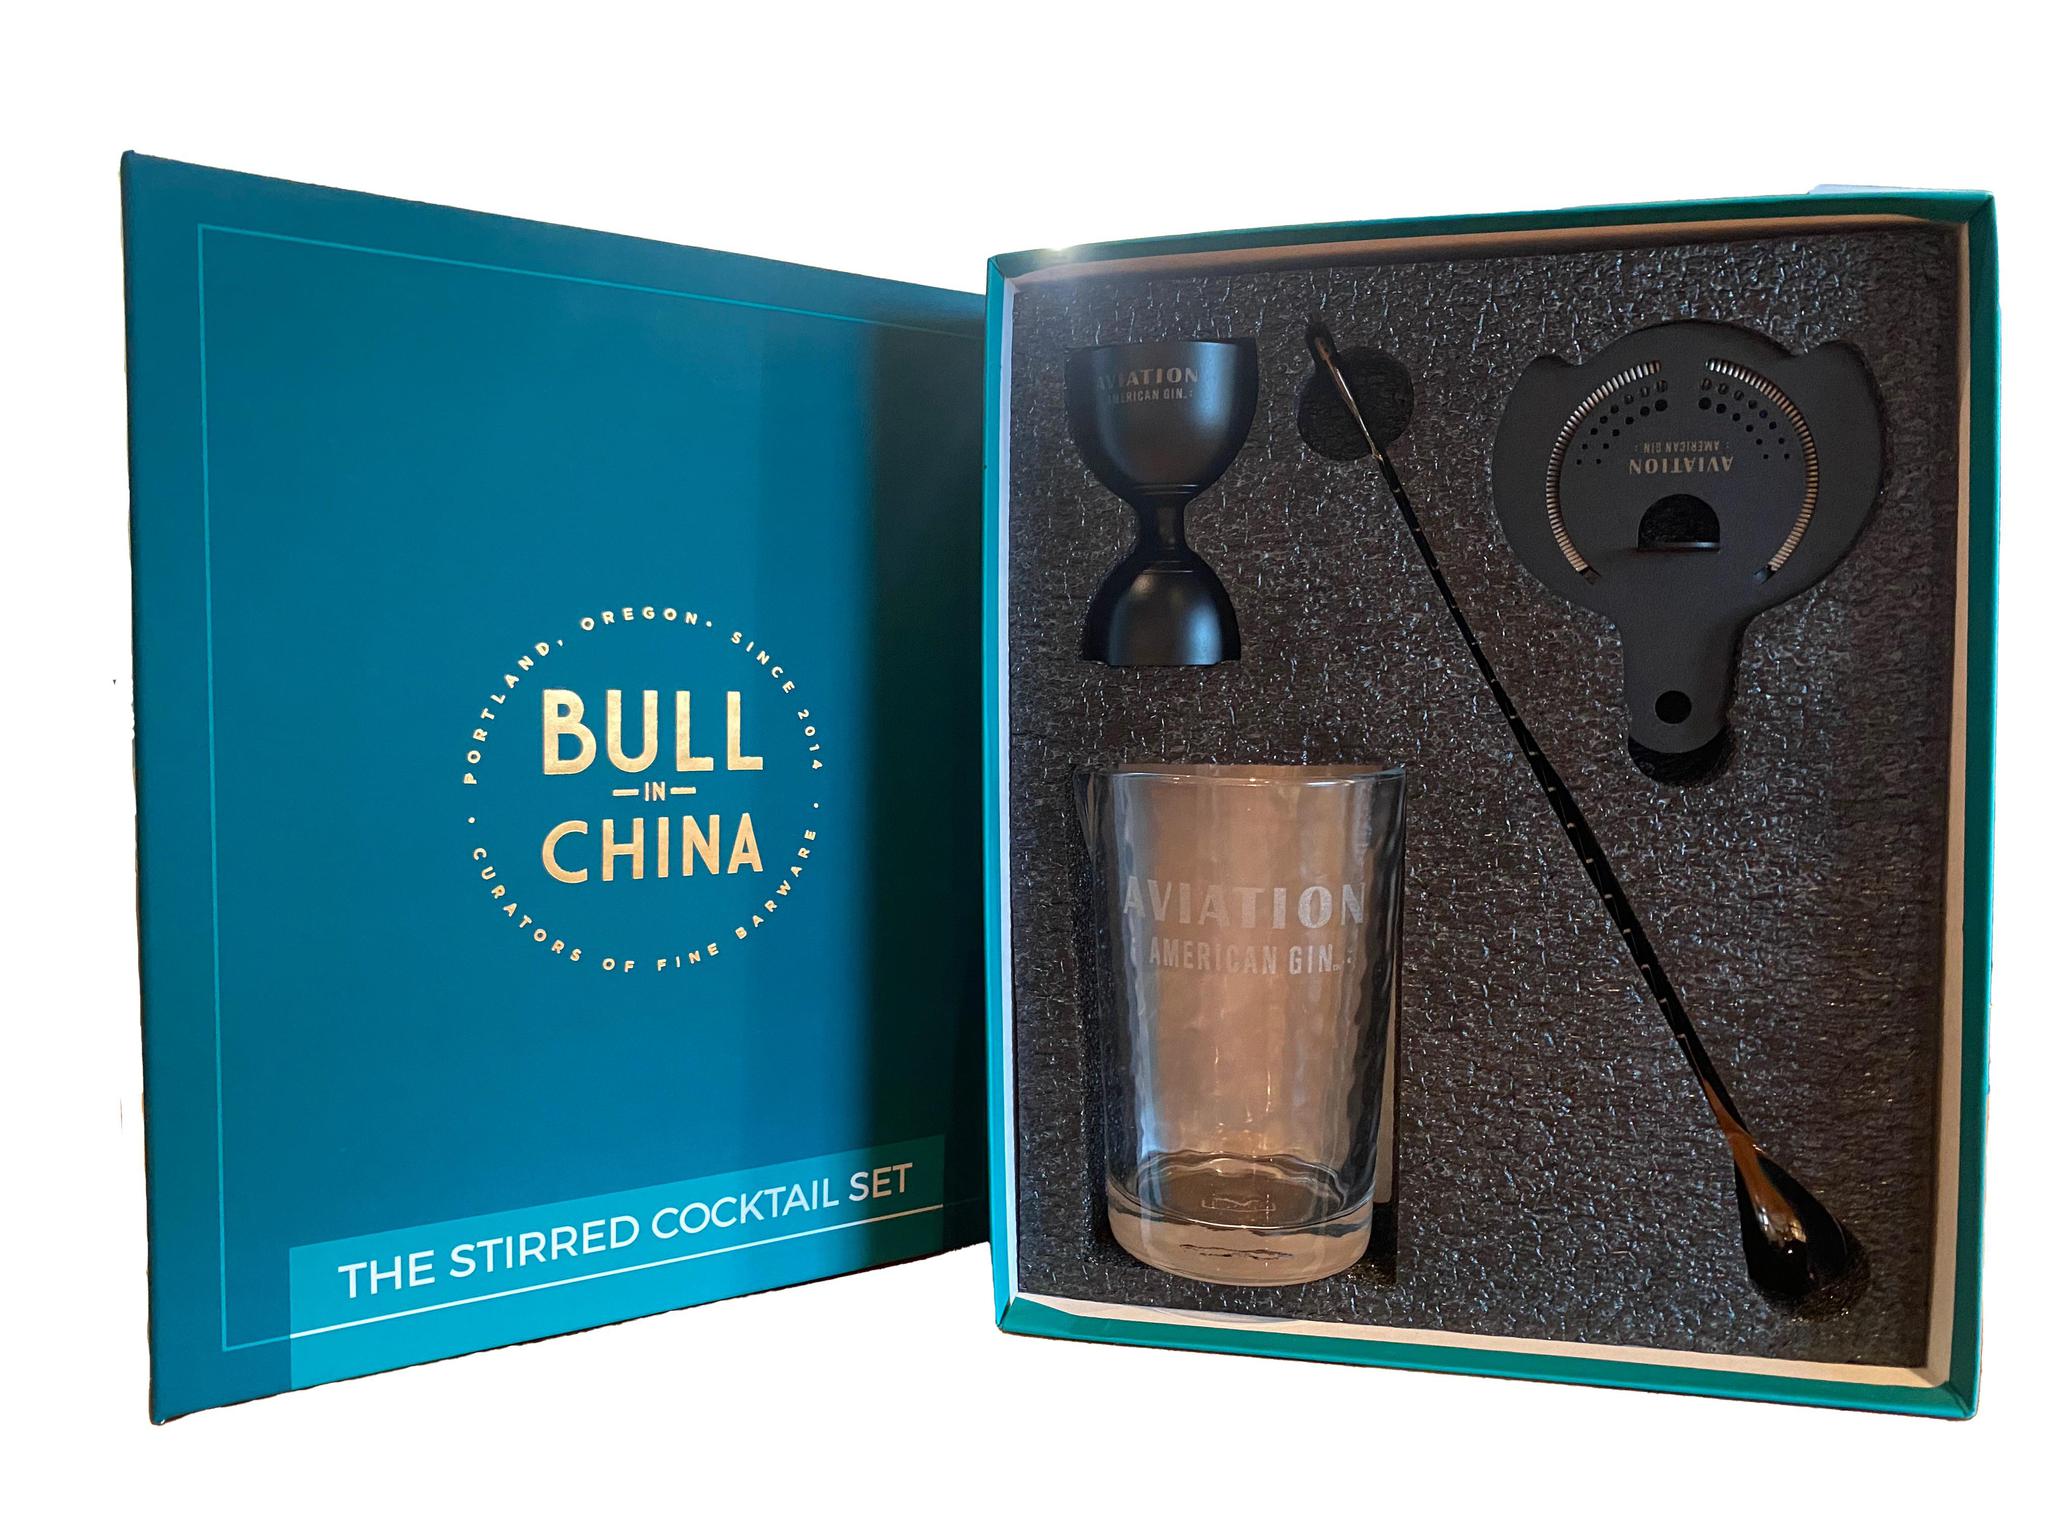 Aviation X Bull in China The Stirred Cocktail Set